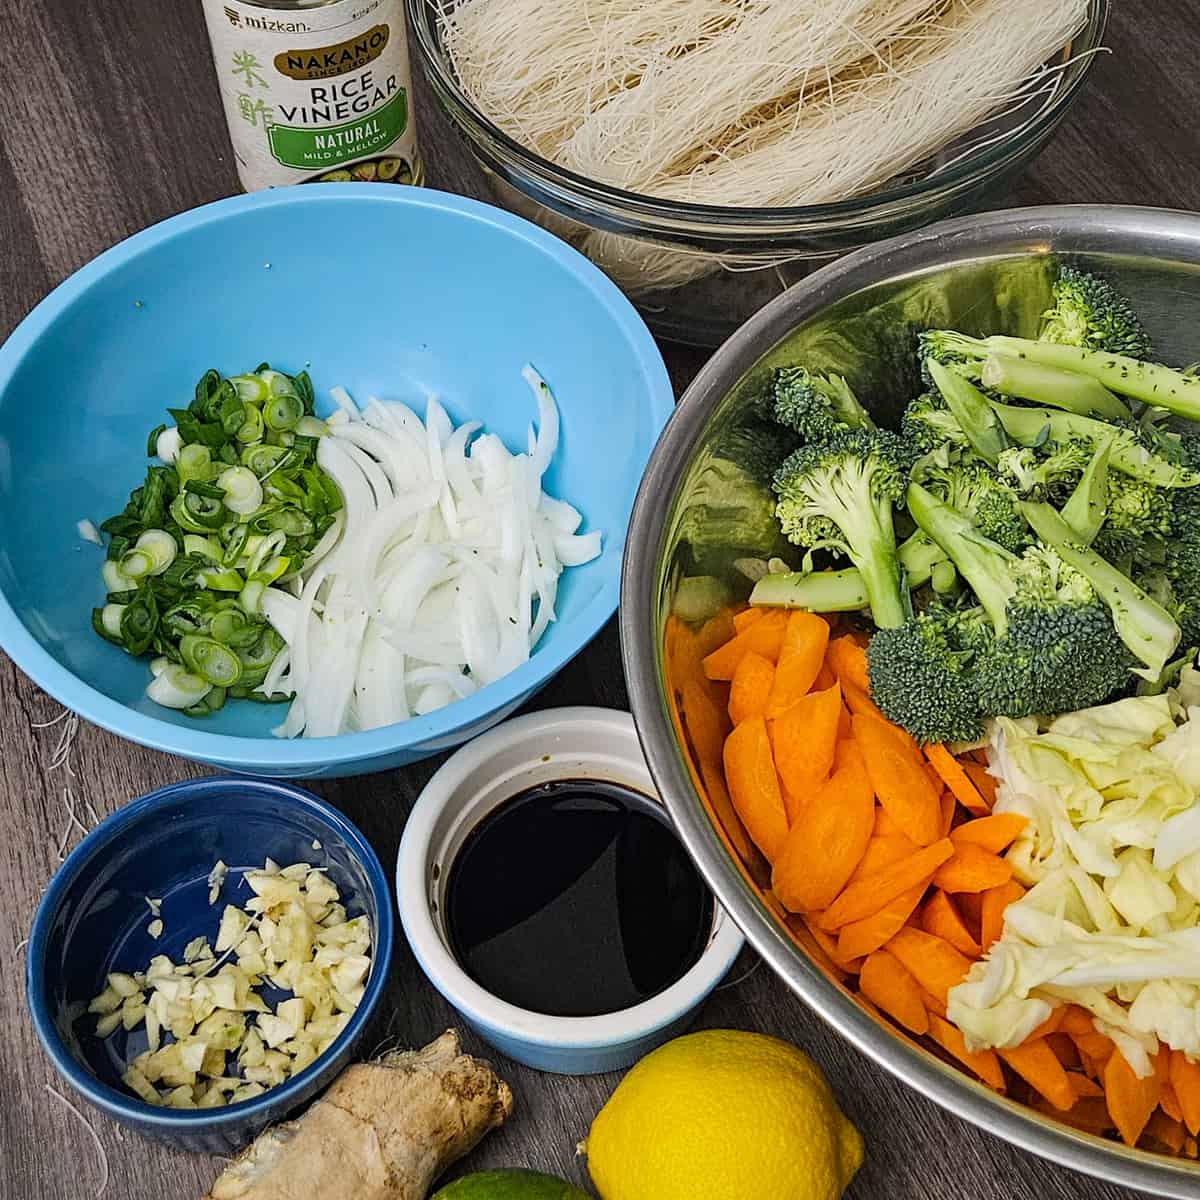 the ingredients for the easy Asian vegetable stir fry rice noodle recipe